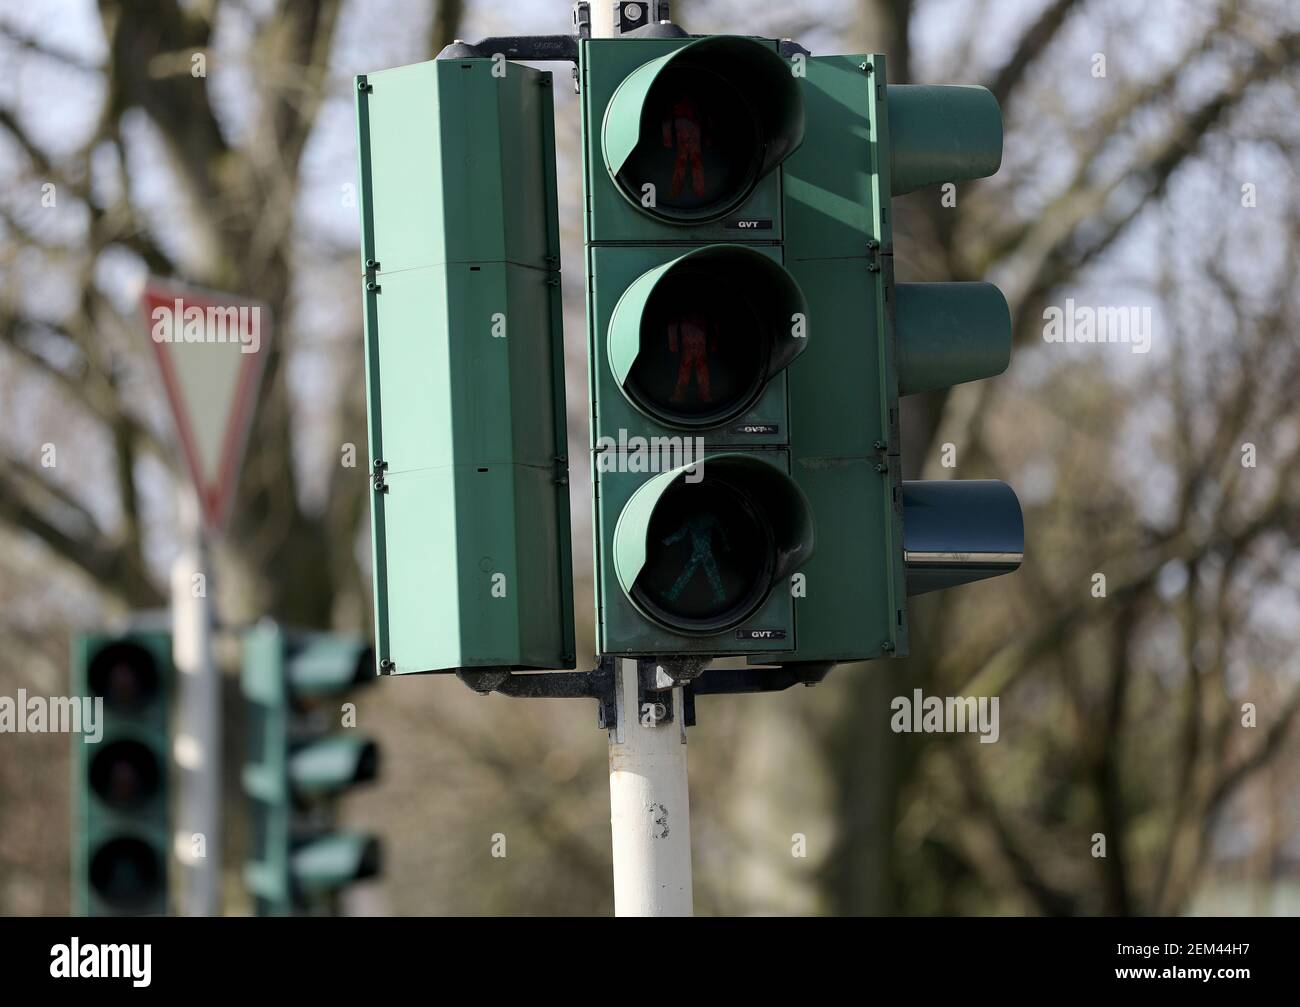 https://c8.alamy.com/comp/2EM44H7/schwerte-germany-24th-feb-2021-a-traffic-light-at-an-intersection-is-out-of-service-the-city-wide-power-outage-after-a-fire-in-a-substation-in-schwerte-is-expected-to-last-at-least-until-the-evening-to-dpalnw-power-outage-in-schwerte-expected-to-last-at-least-until-evening-credit-oliver-bergdpaalamy-live-news-2EM44H7.jpg